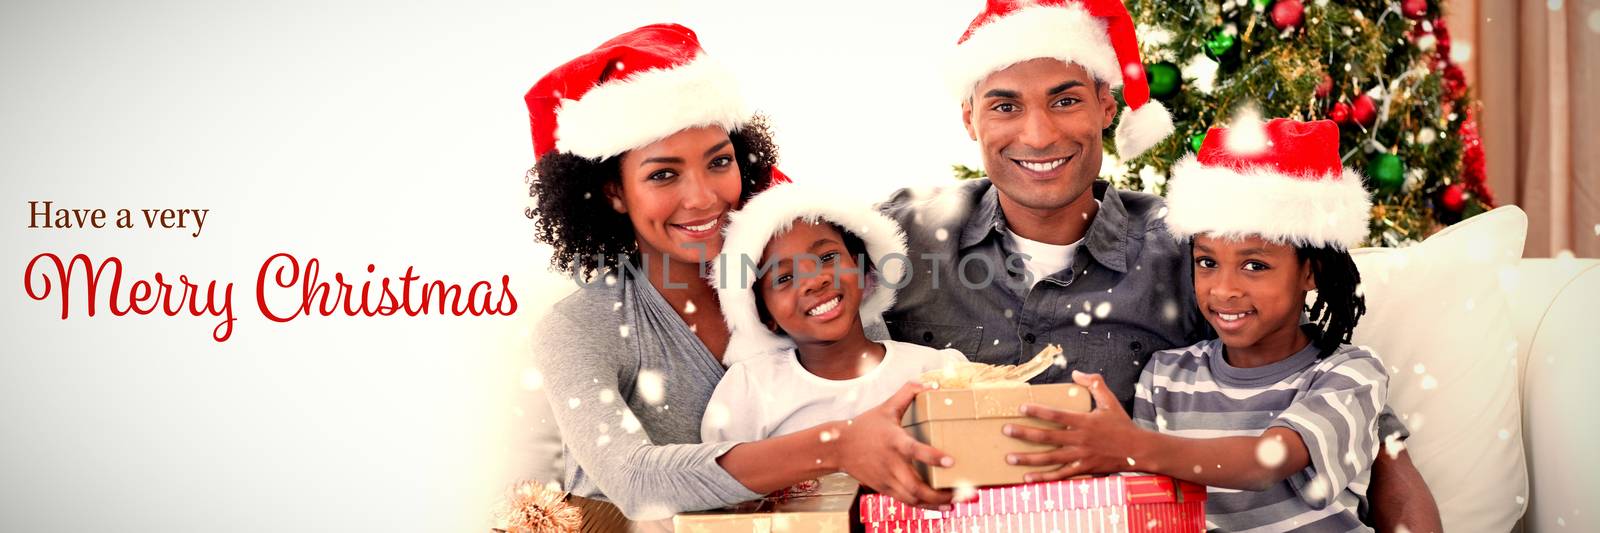 Smiling family sharing Christmas presents against christmas card